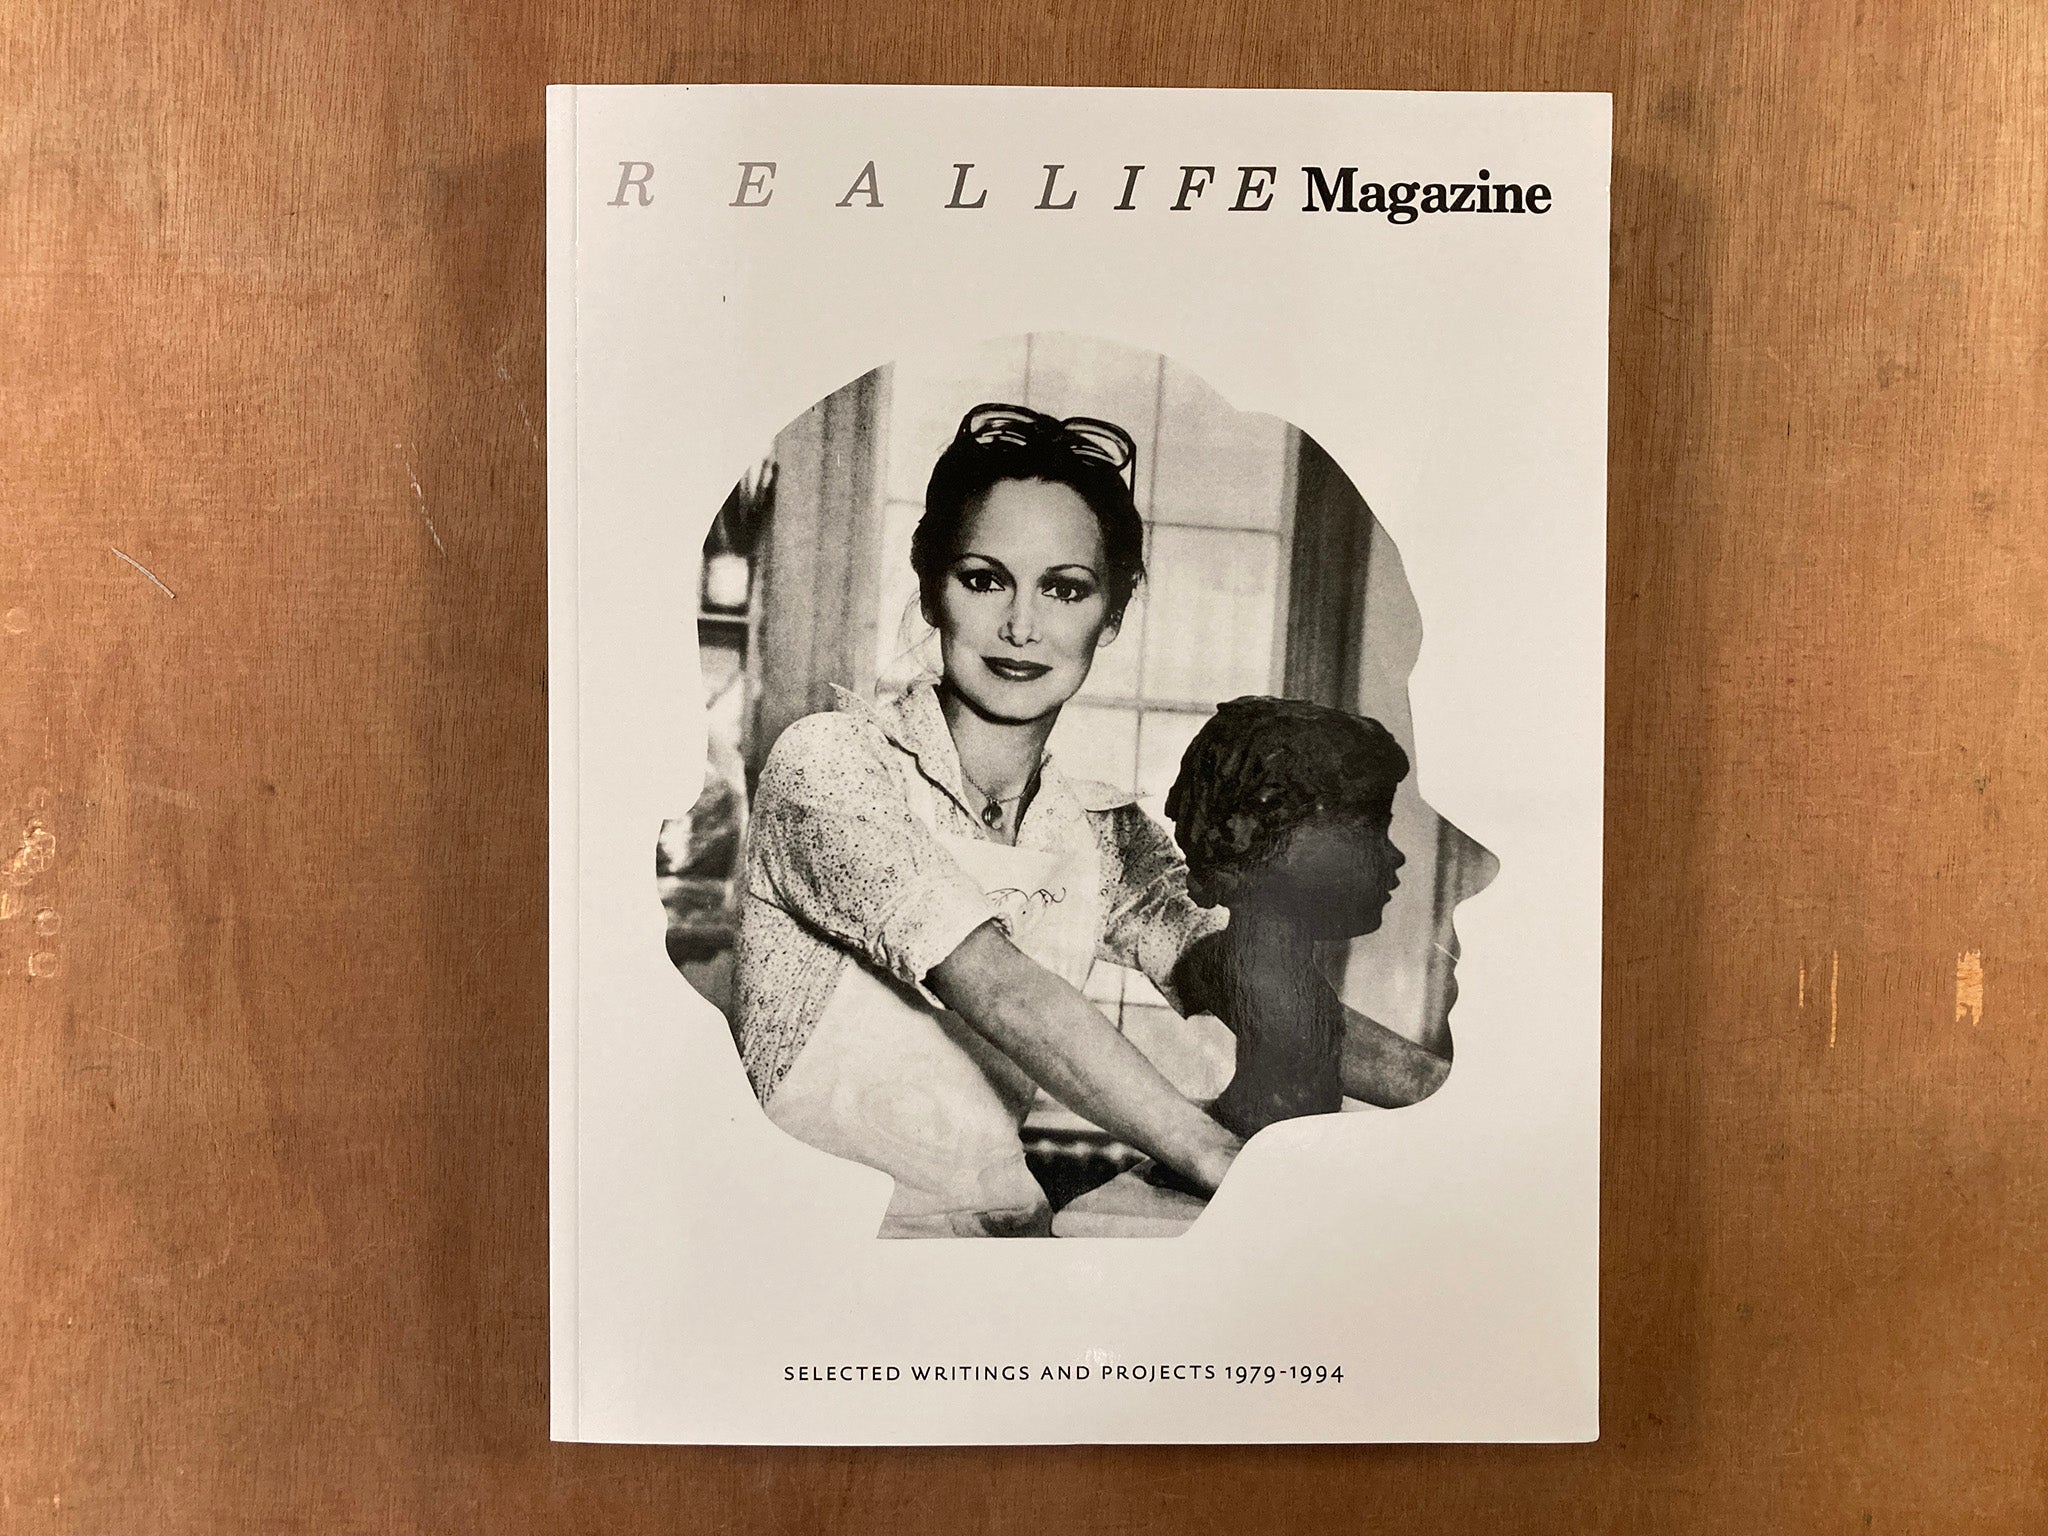 REALLIFE MAGAZINE: SELECTED WRITINGS AND PROJECTS 1979-1994